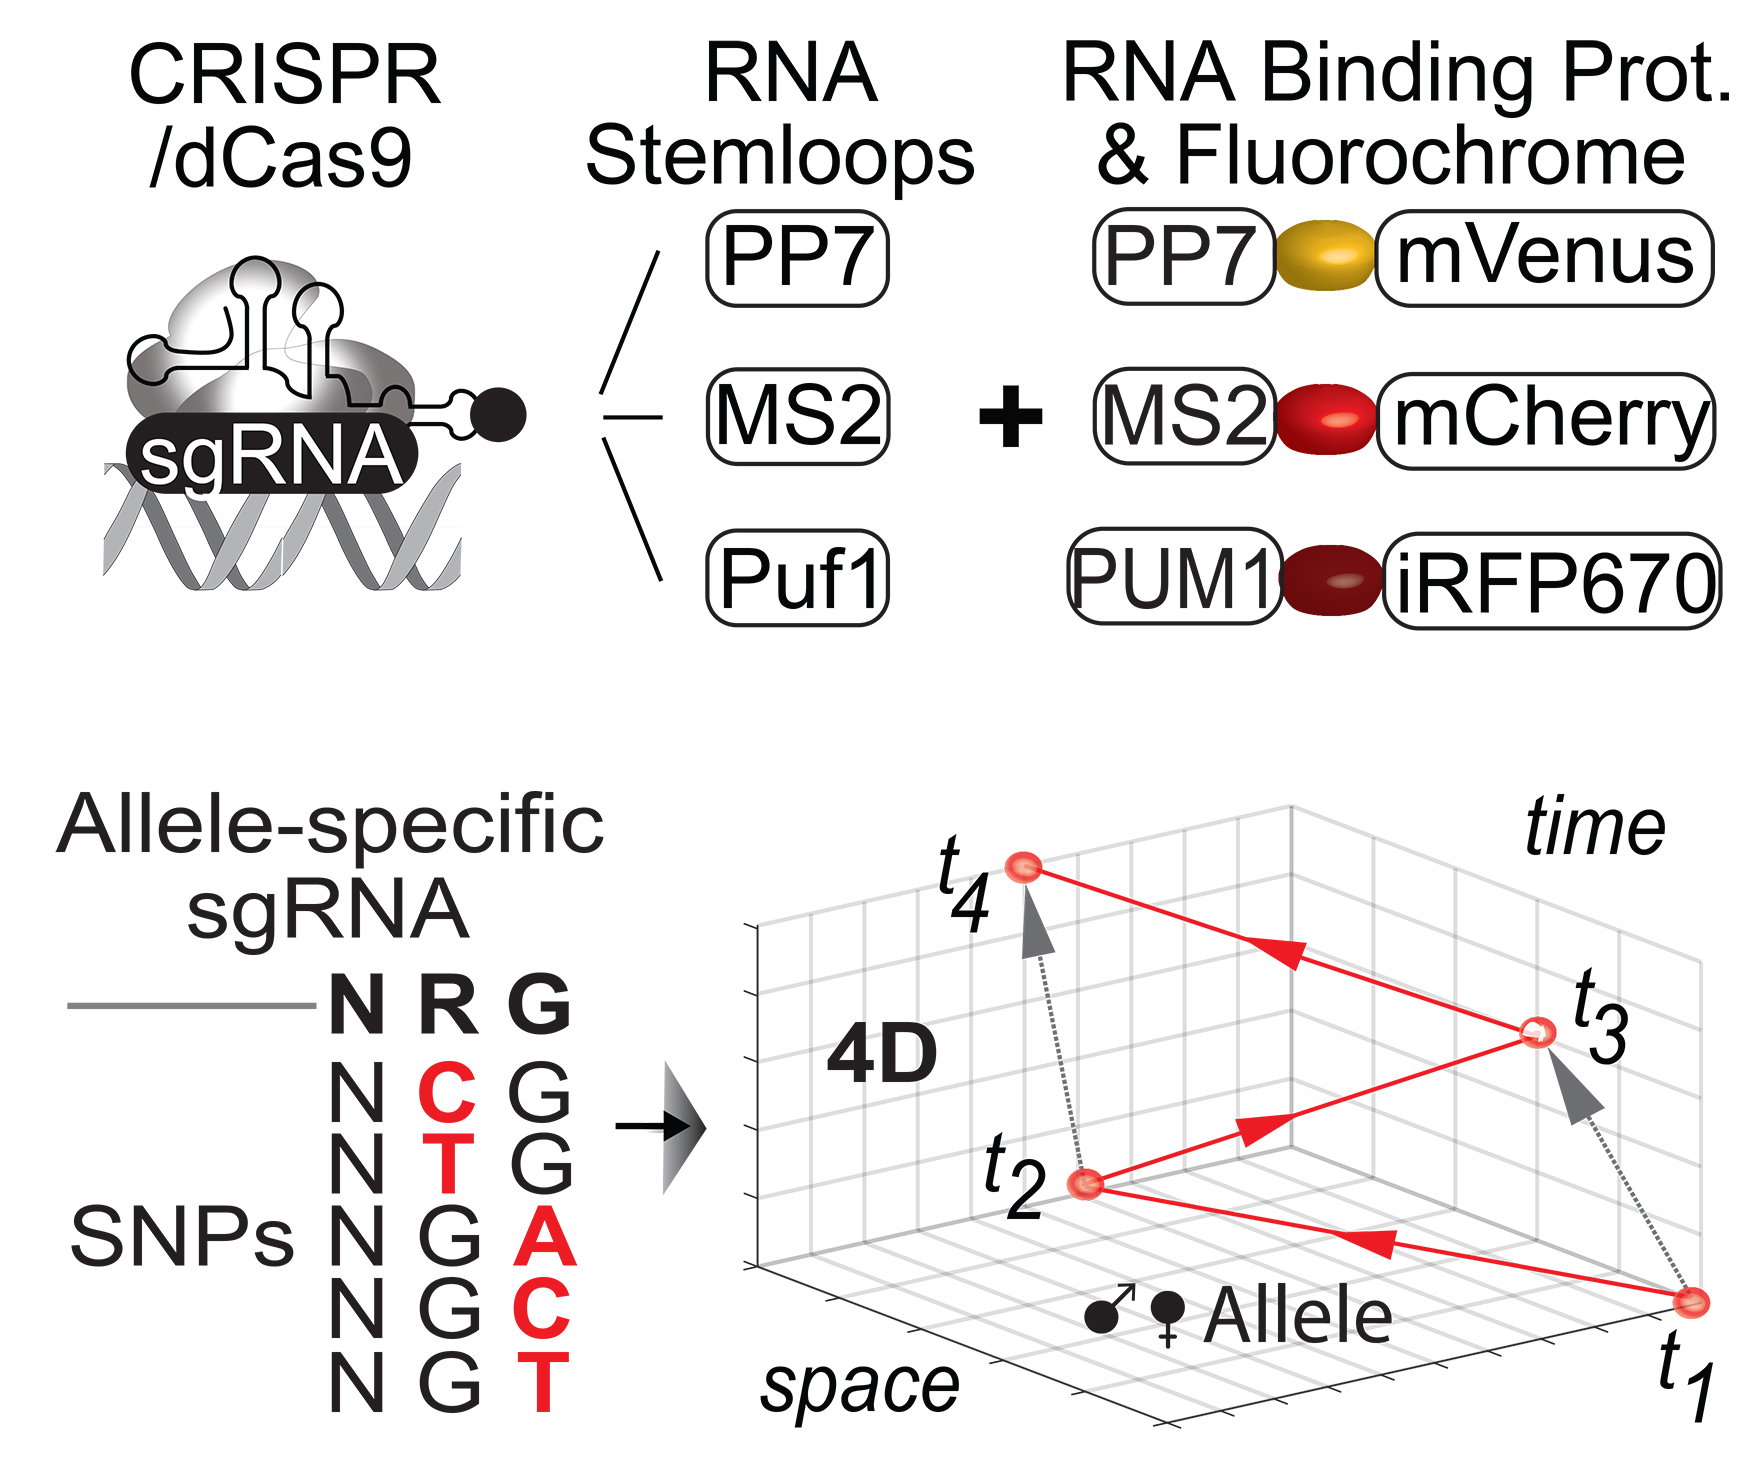 CRISPR/dCas9 live-cell imaging (CLING) uses RNA binding proteins (MS2, PP7, Puf1) fused to fluorescent reporters to target DNA loci.